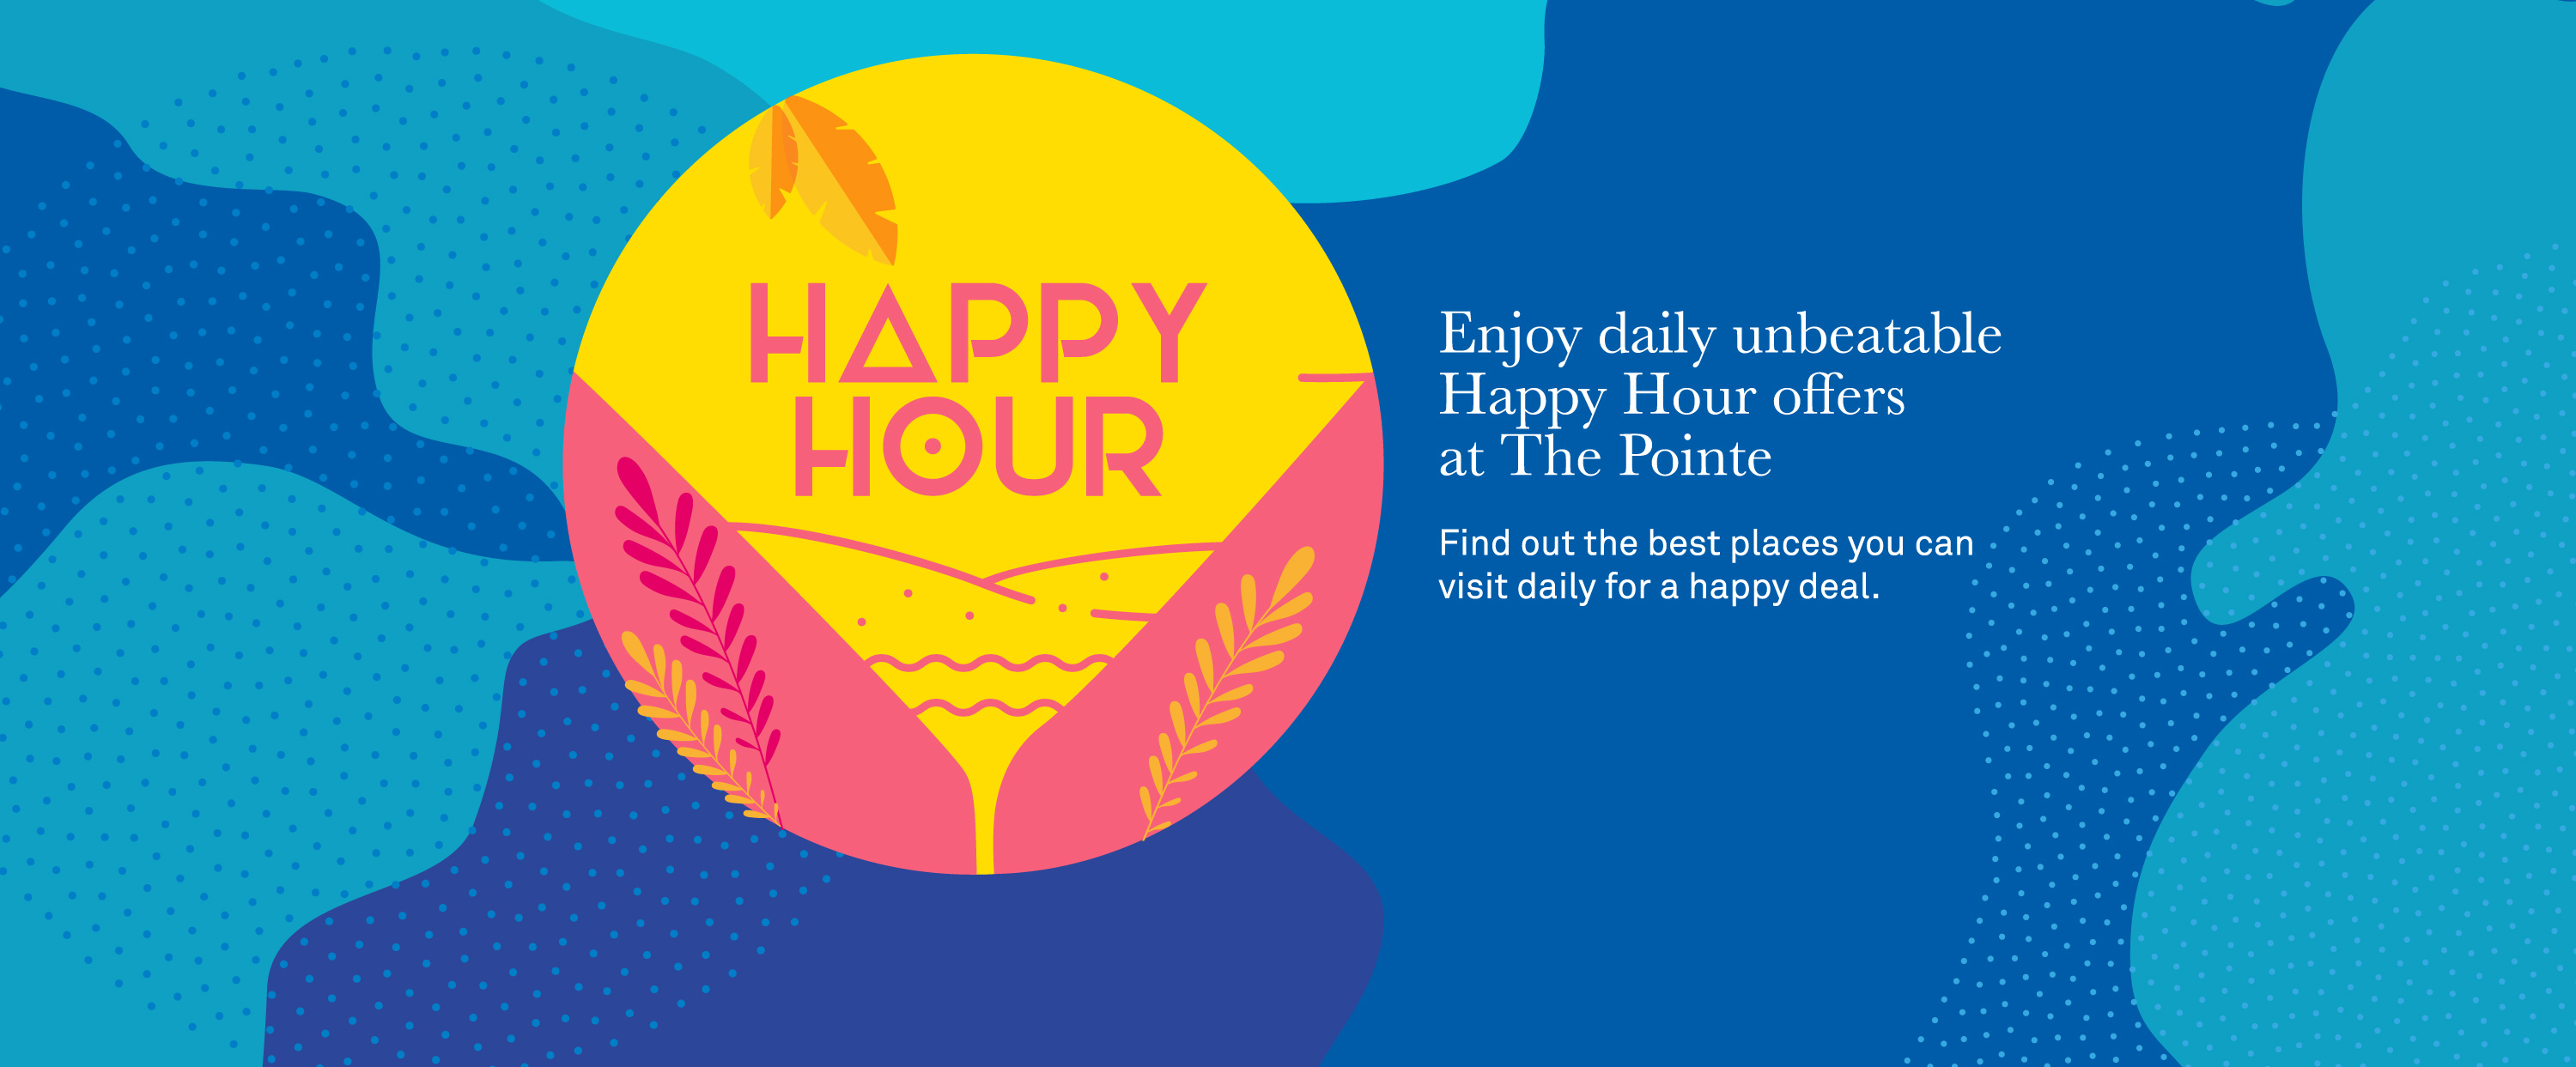 Restaurants and Cafes Happy Hour Deals